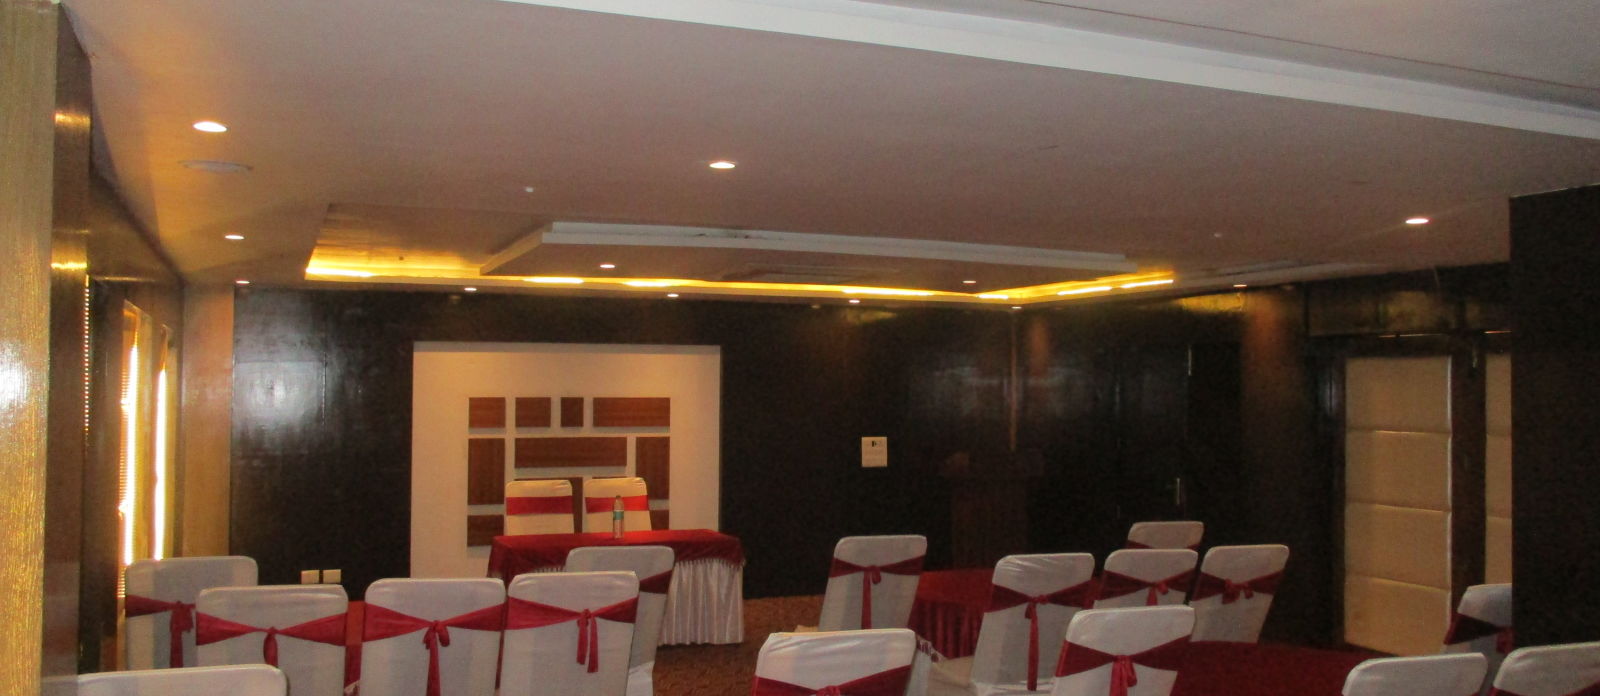 Gangotri Hall captured with seats arranged in theatre style - le roi udaipur hotel1